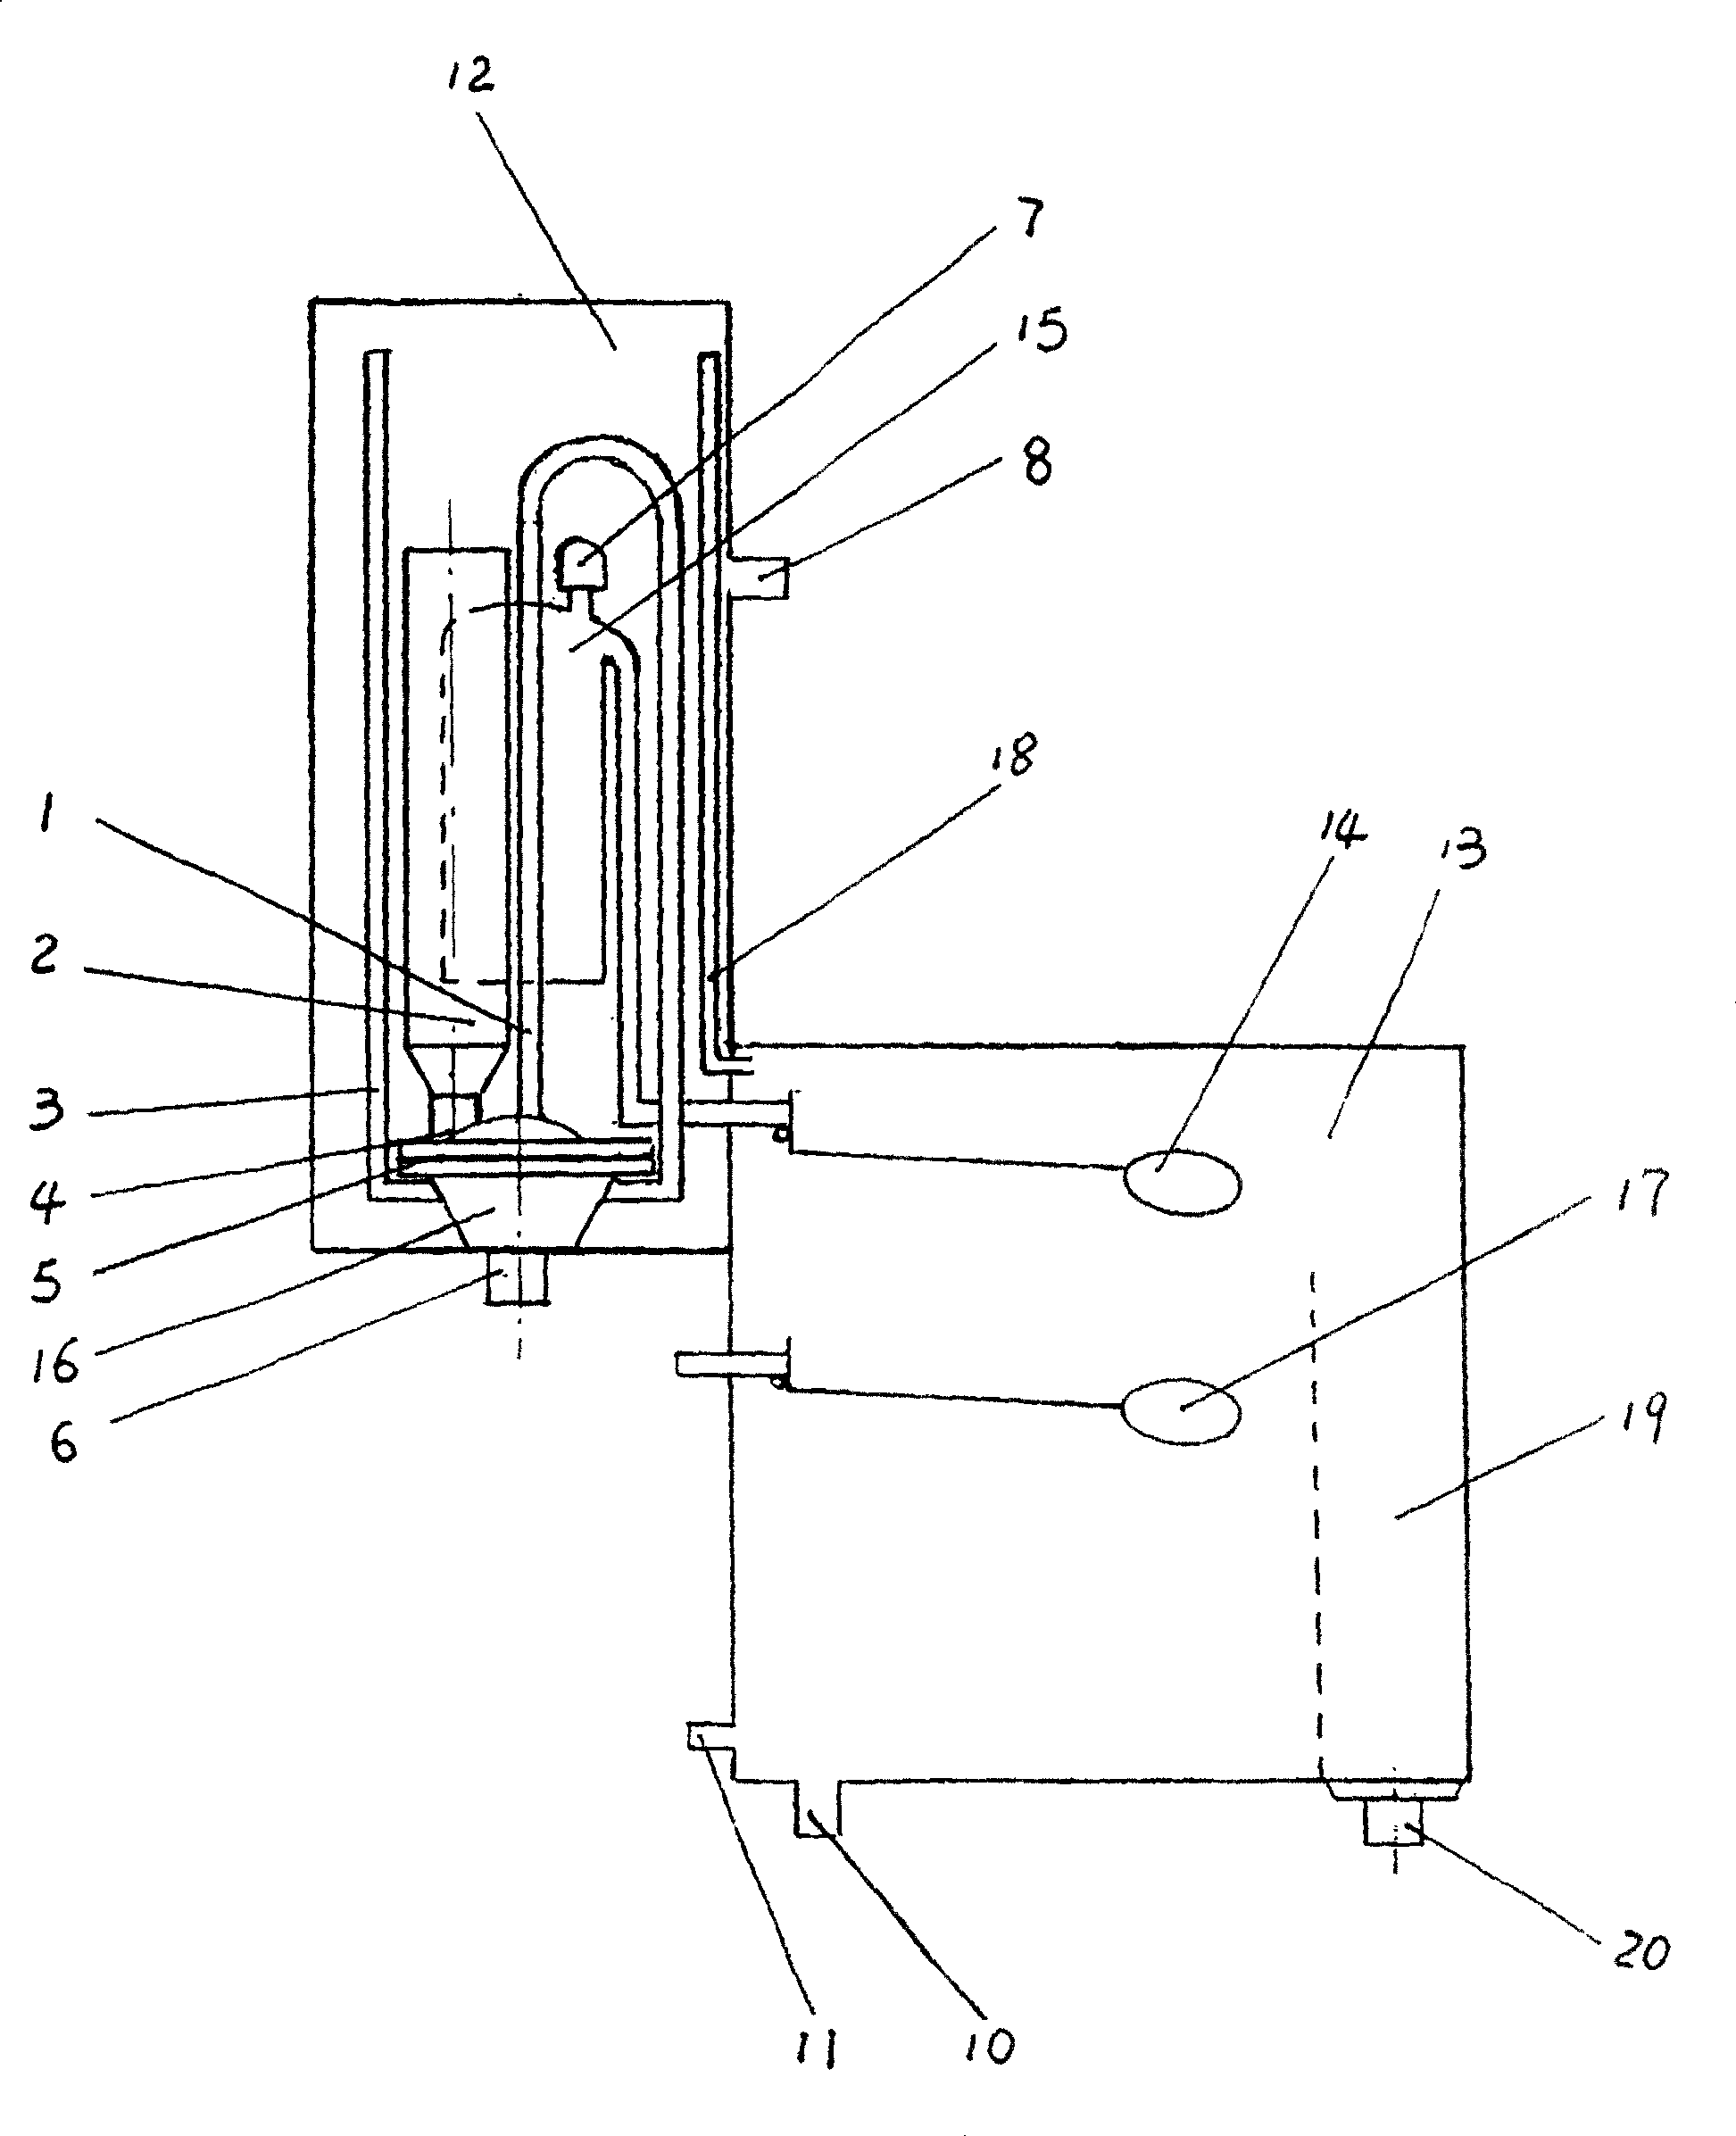 Non-electric full-automatic wall-hanging water tank for building capable of collecting waste water to flush toilet